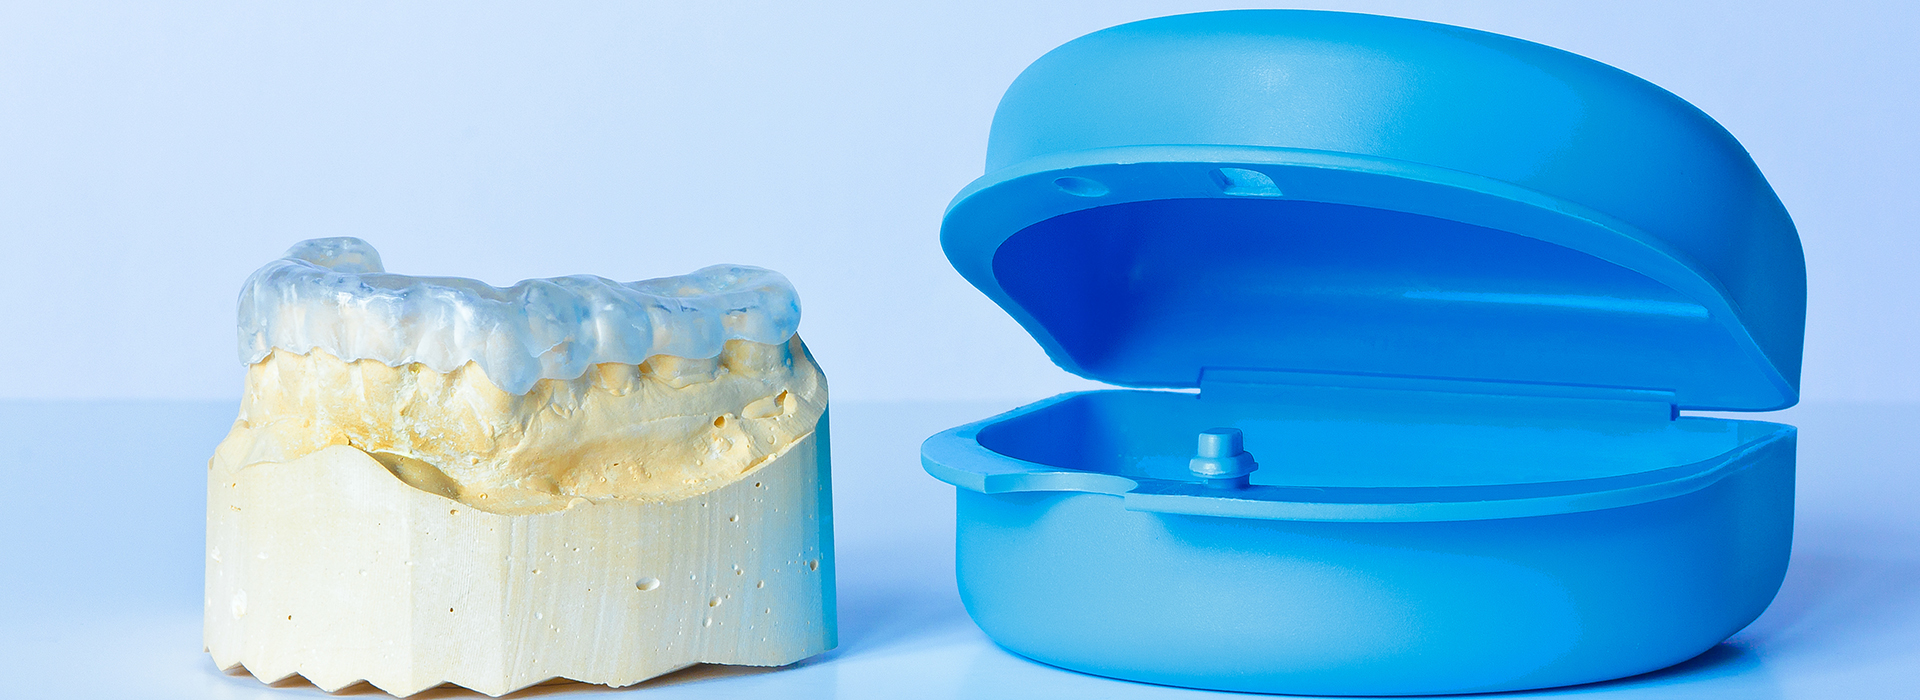 The image features a side-by-side comparison of a dental implant and its corresponding model, with the implant on the right being a solid, white tooth-like structure and the model on the left being a blue, plastic representation.